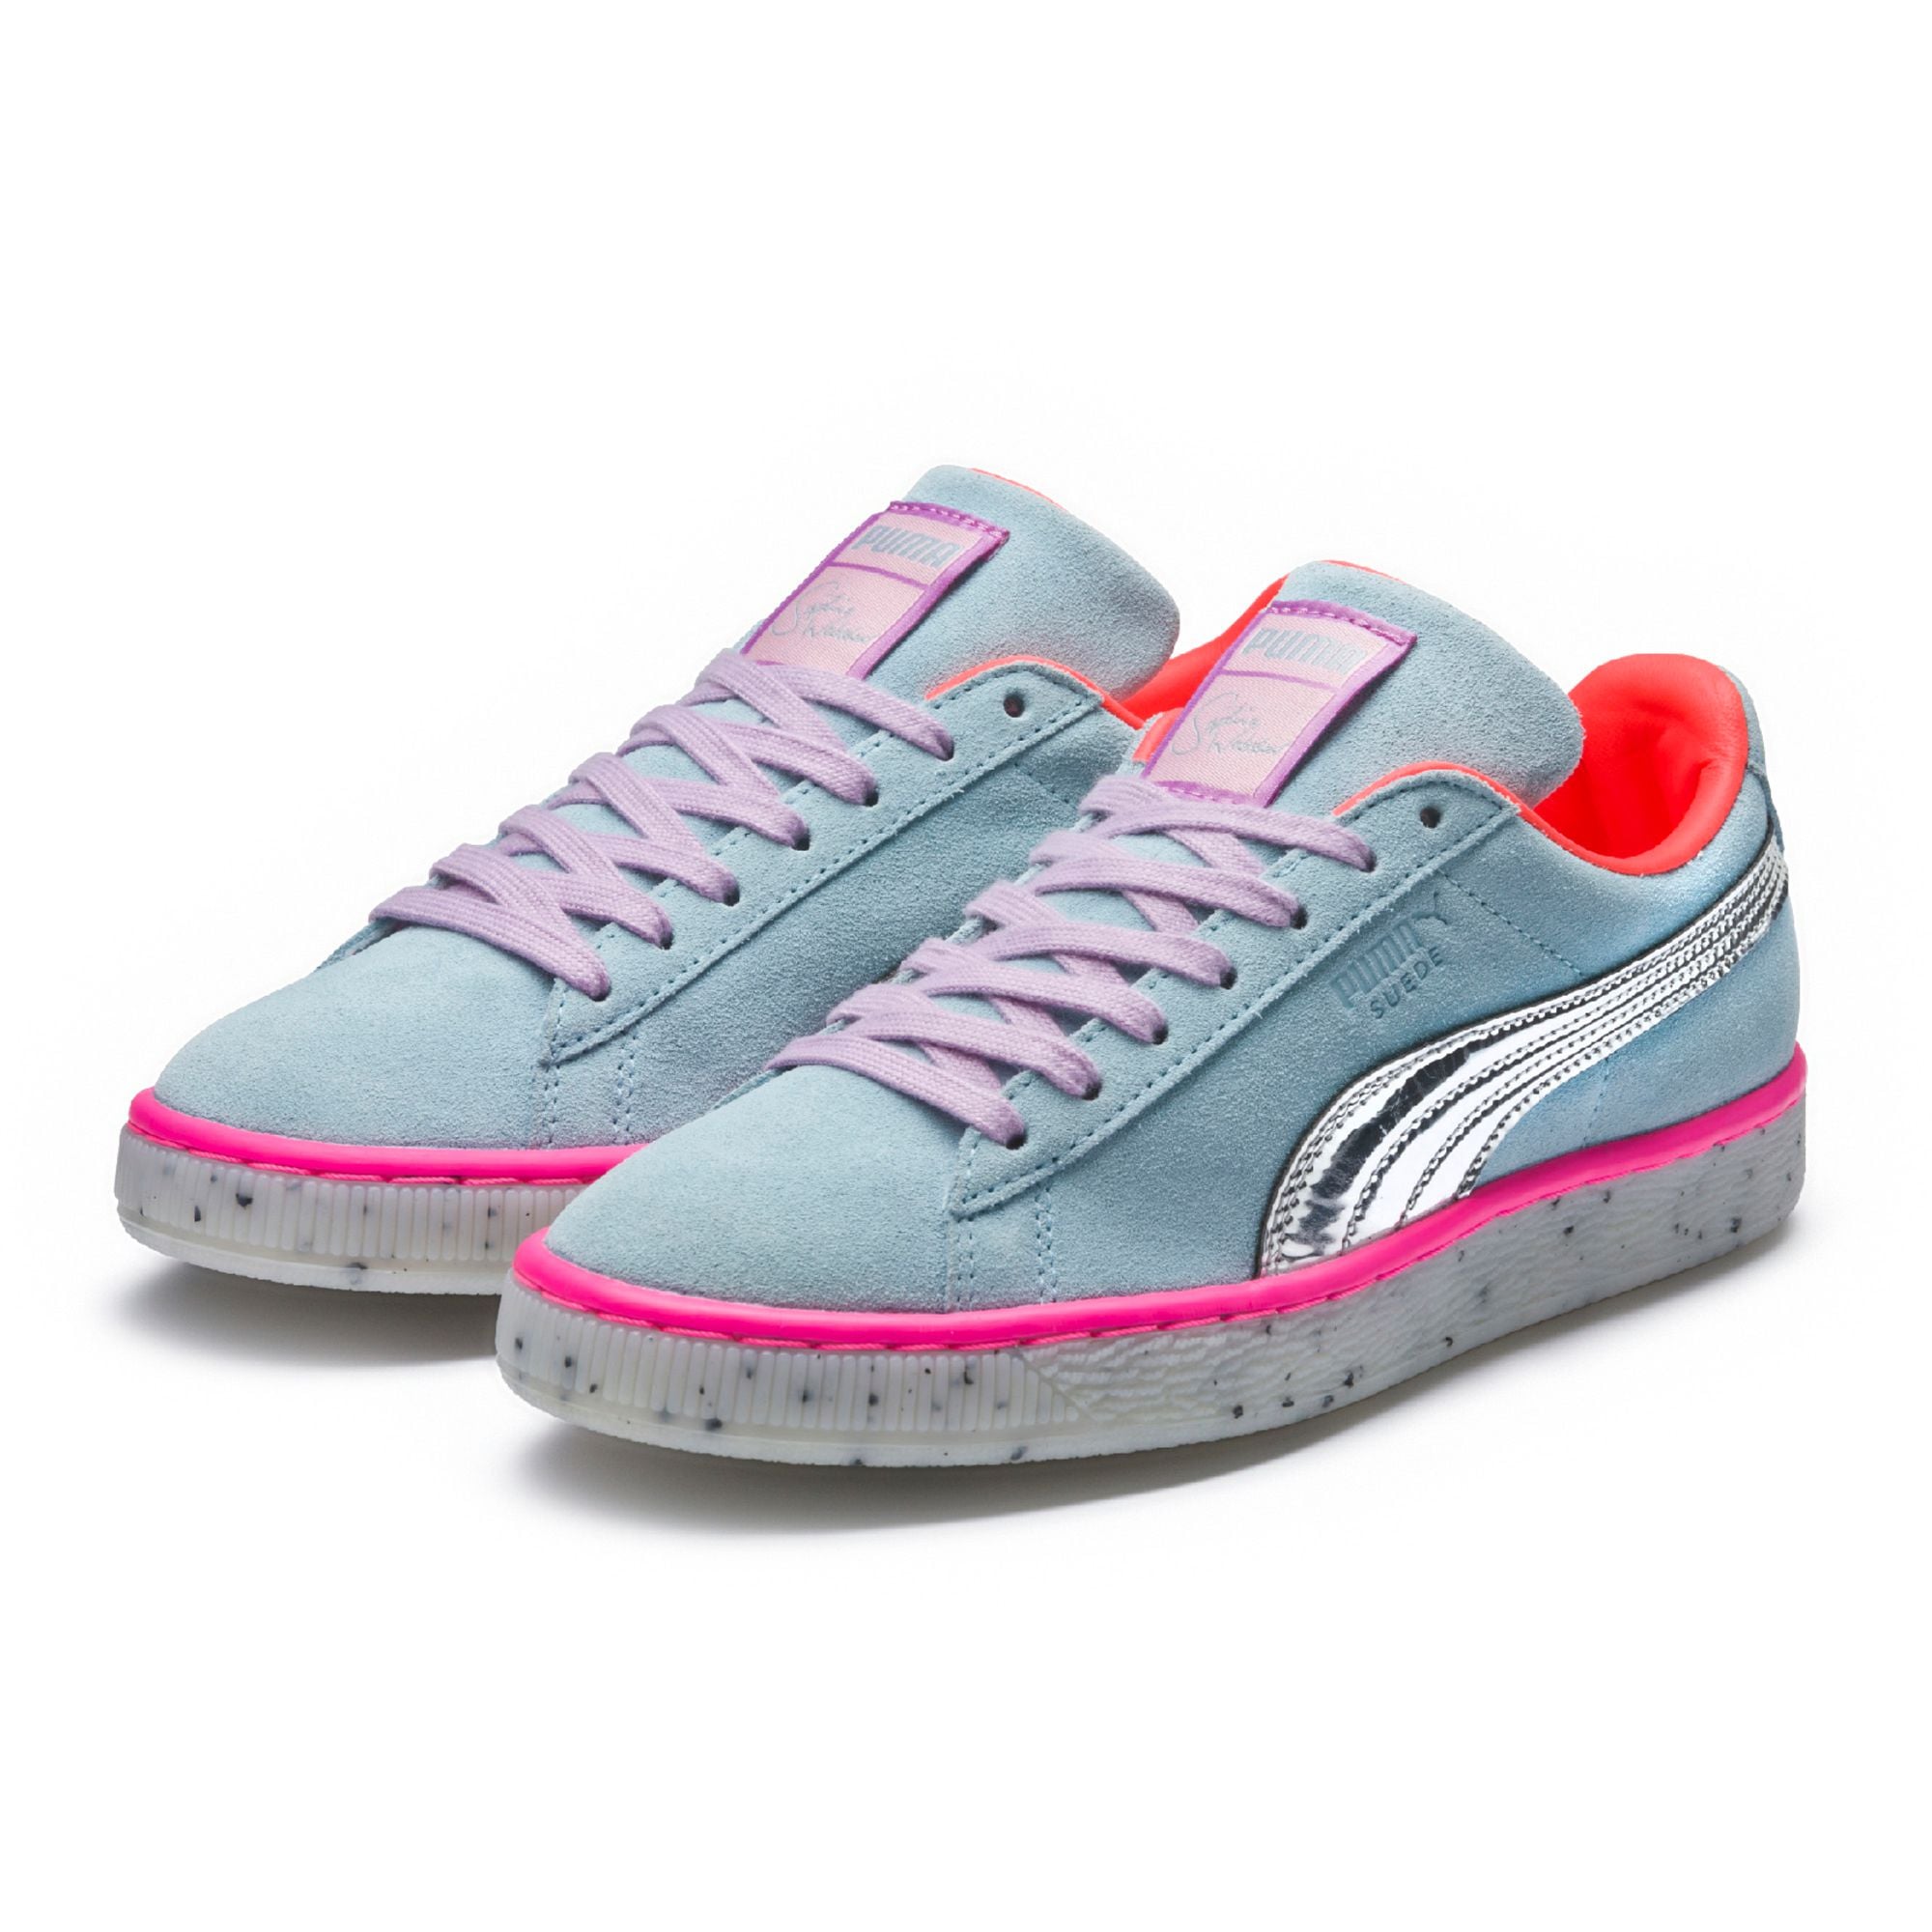 Puma x Sophia Webster Suede Candy Princess Sneakers | Puma's Latest  Designer Shoe Collab Is What Summer Dreams Are Made Of | POPSUGAR Fashion  Photo 7